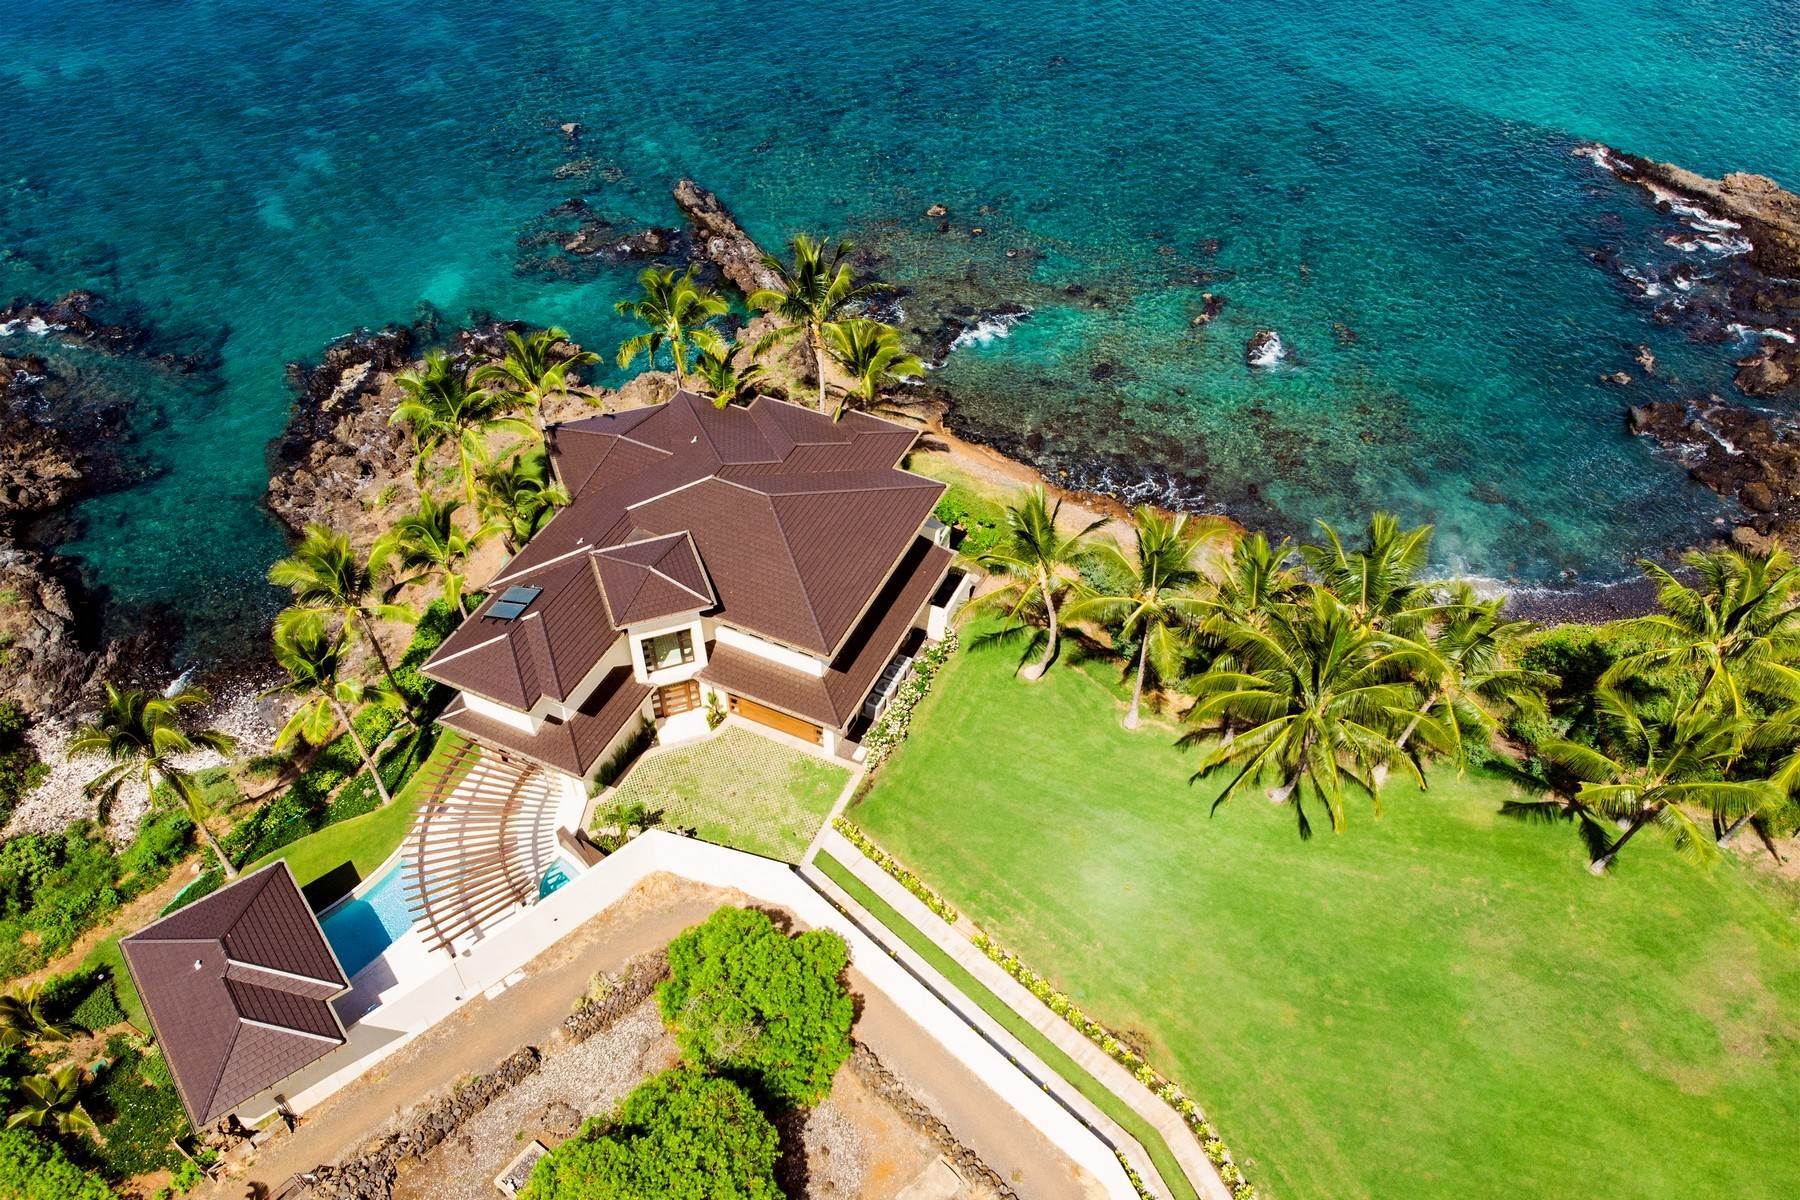 Single Family Homes for Sale at Makena 1.5 Acre Direct Oceanfront New Construction Resort Style Home 5022 Makena Road Makena, Hawaii 96753 United States